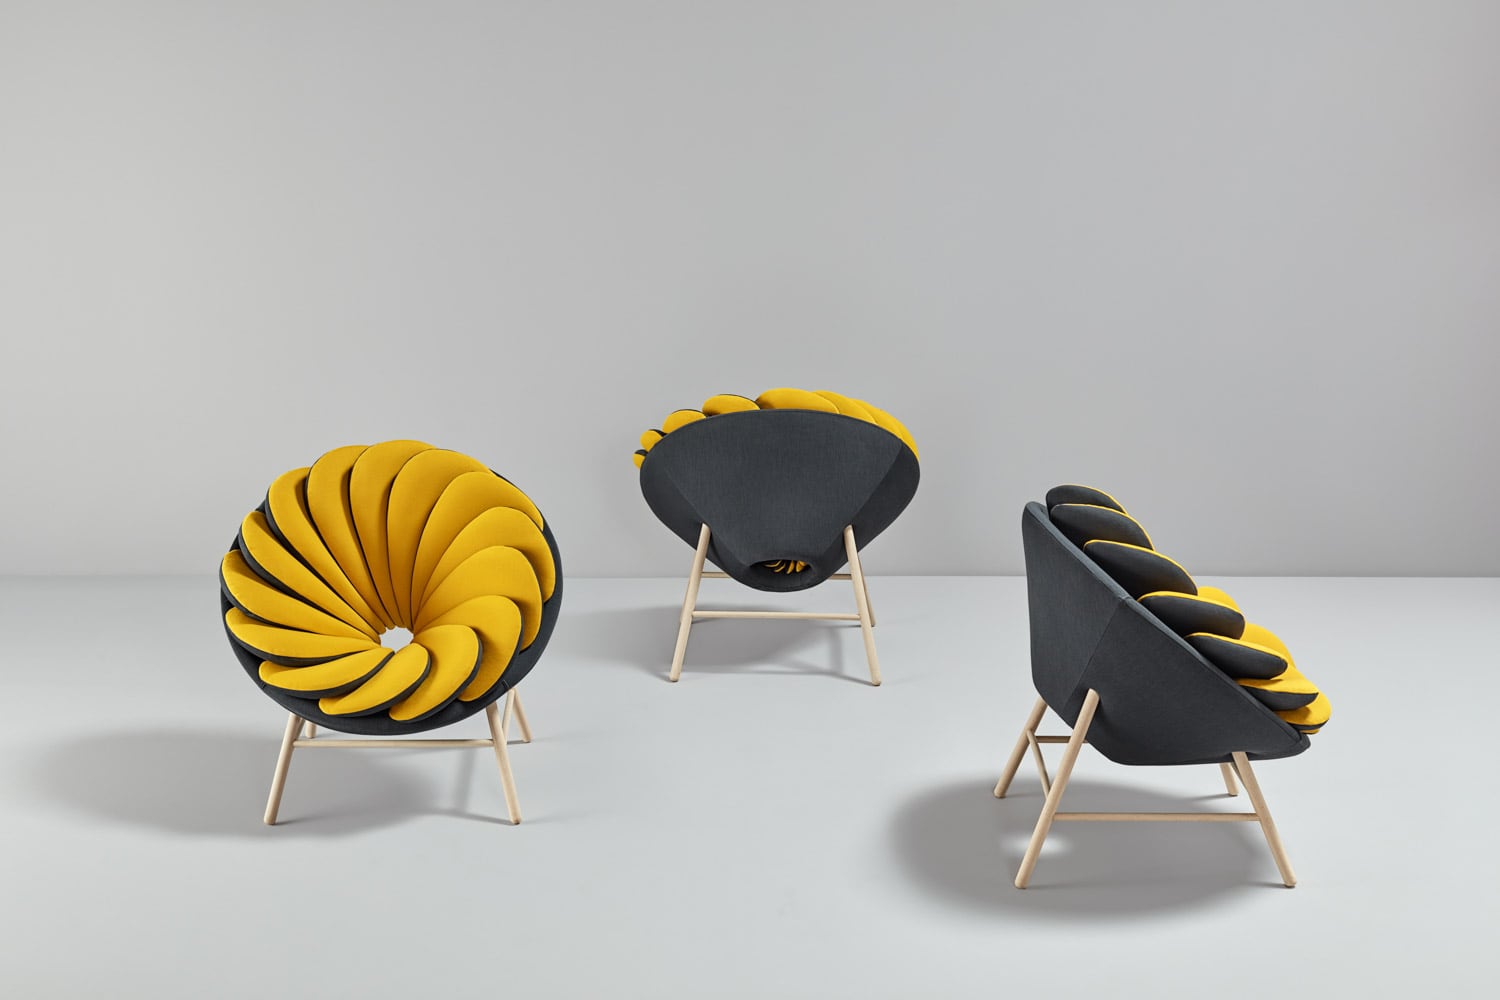 quetzal-armchair-design-innovative-contract-furniture-hospitality